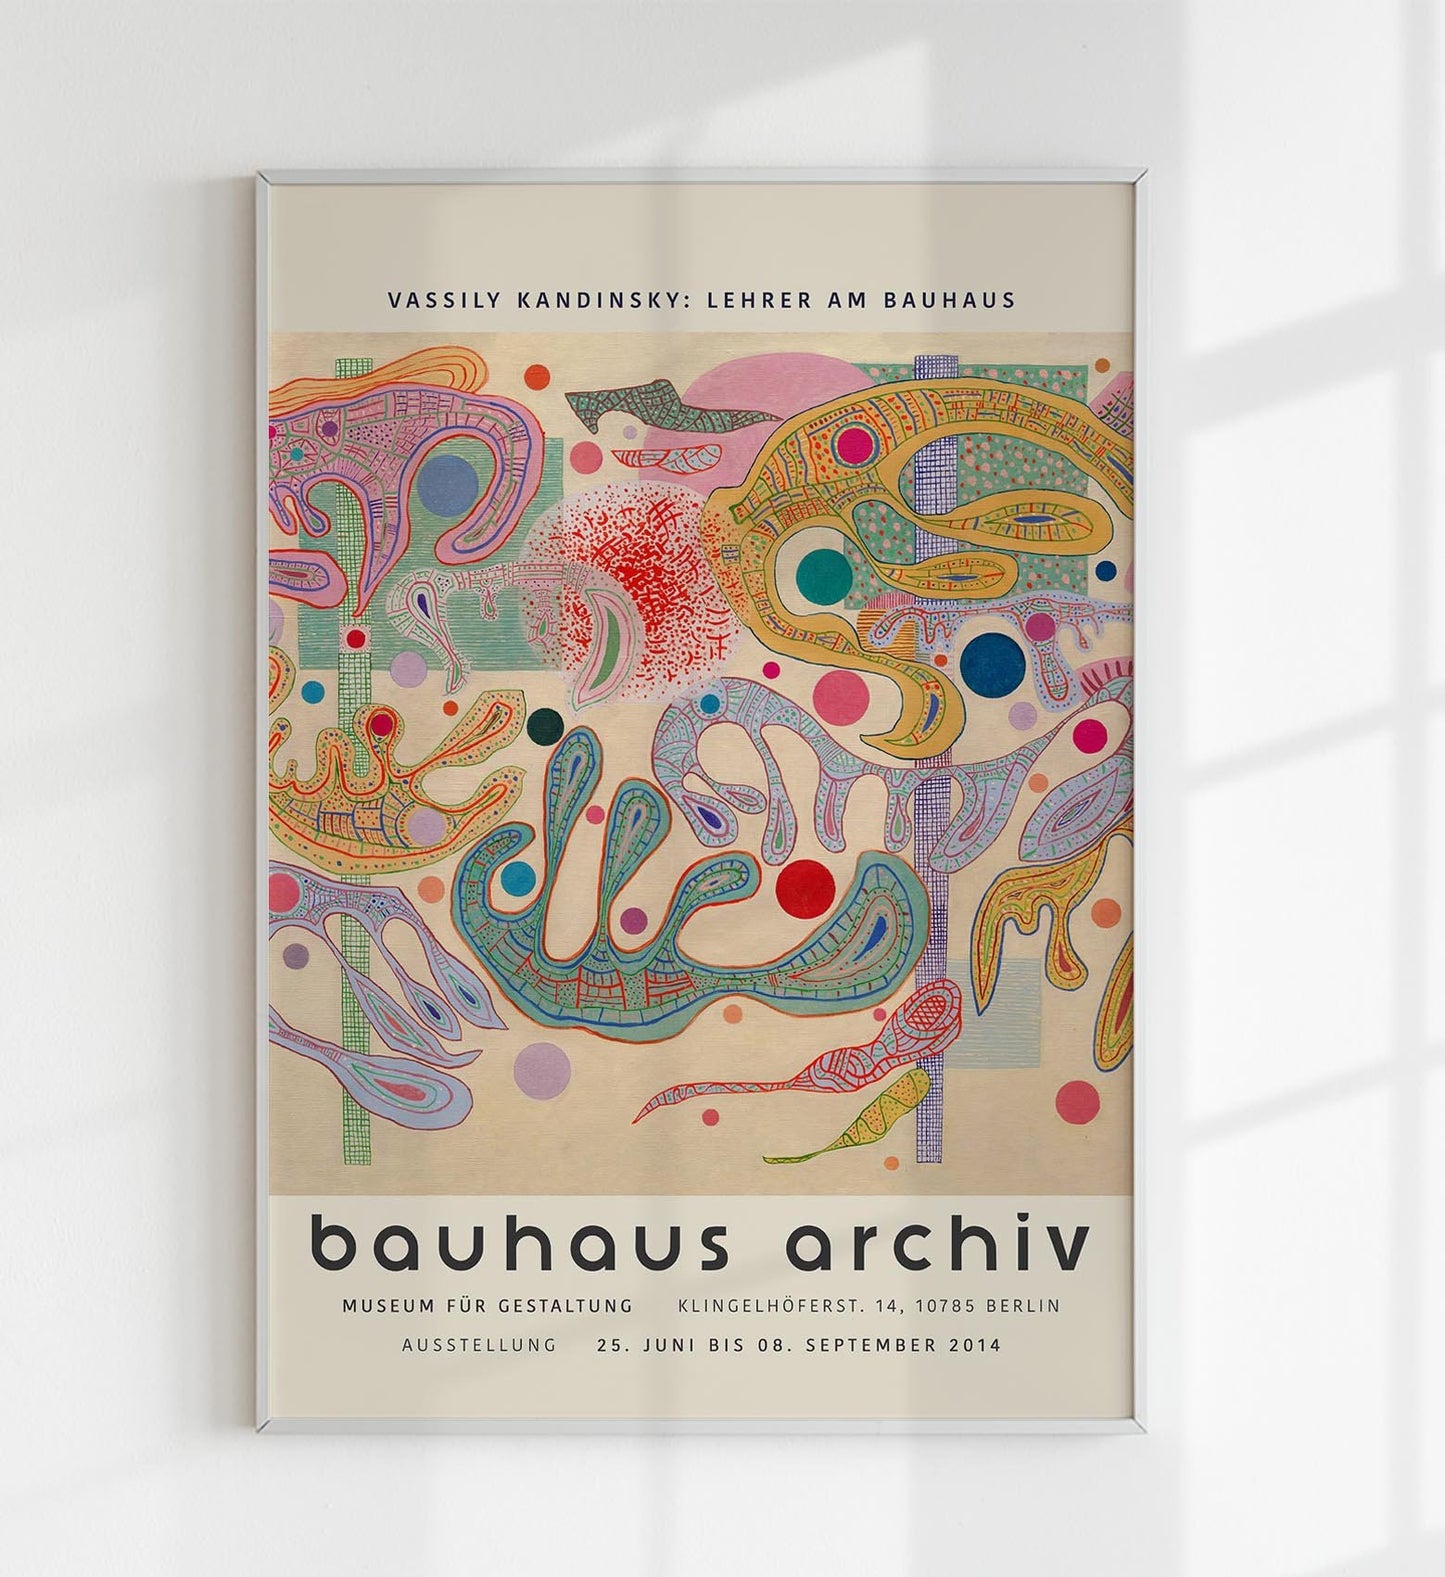 Capricious Form by Wassily Kandinsky Exhibition Poster